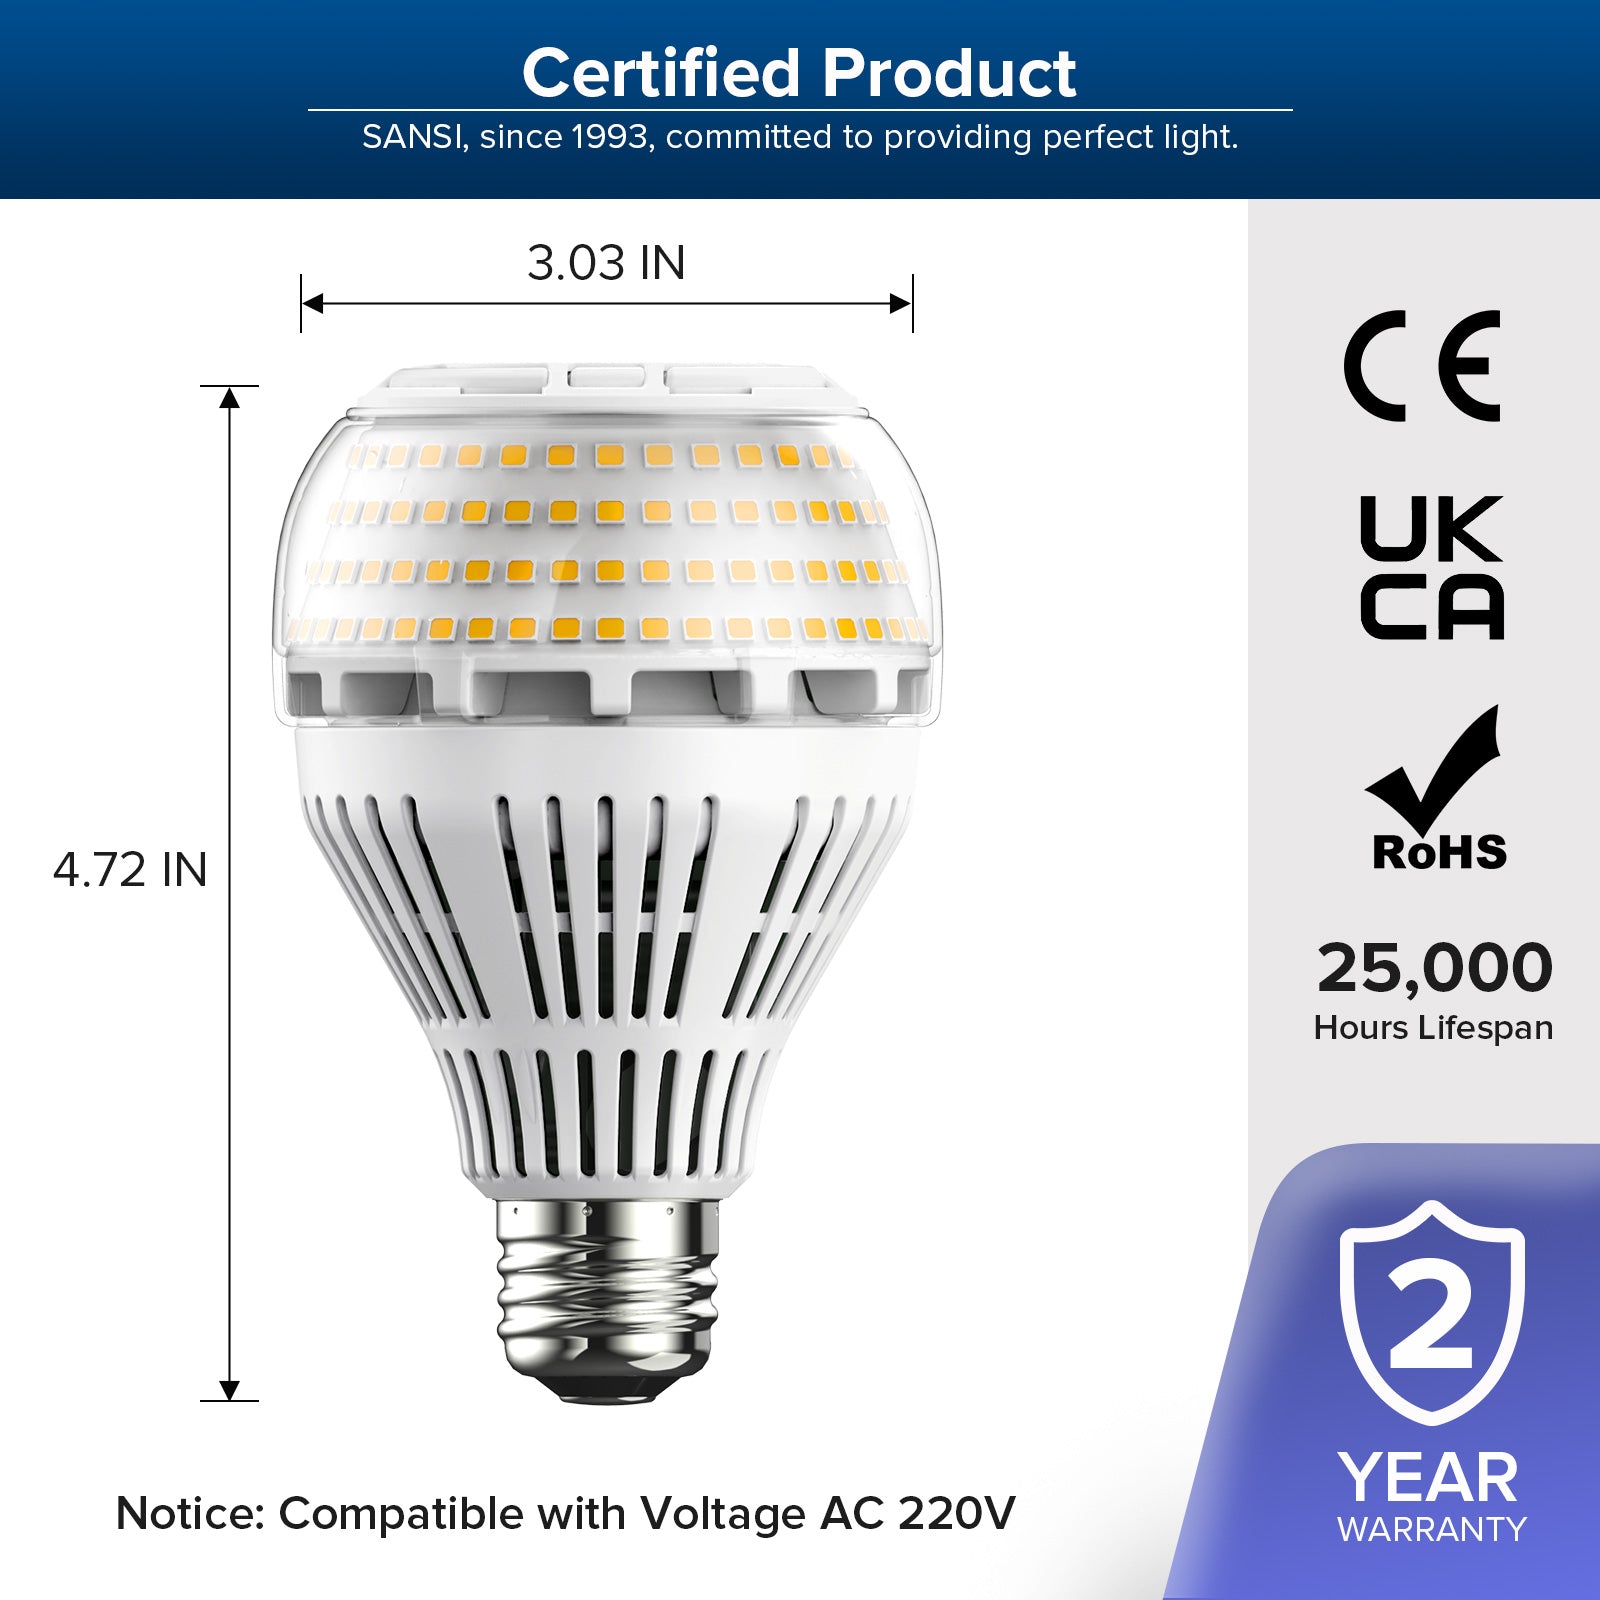 Dimmable A21 27W LED 3000K/5000K Light Bulb has CE、ROHS certification,25000 hours lifespan.